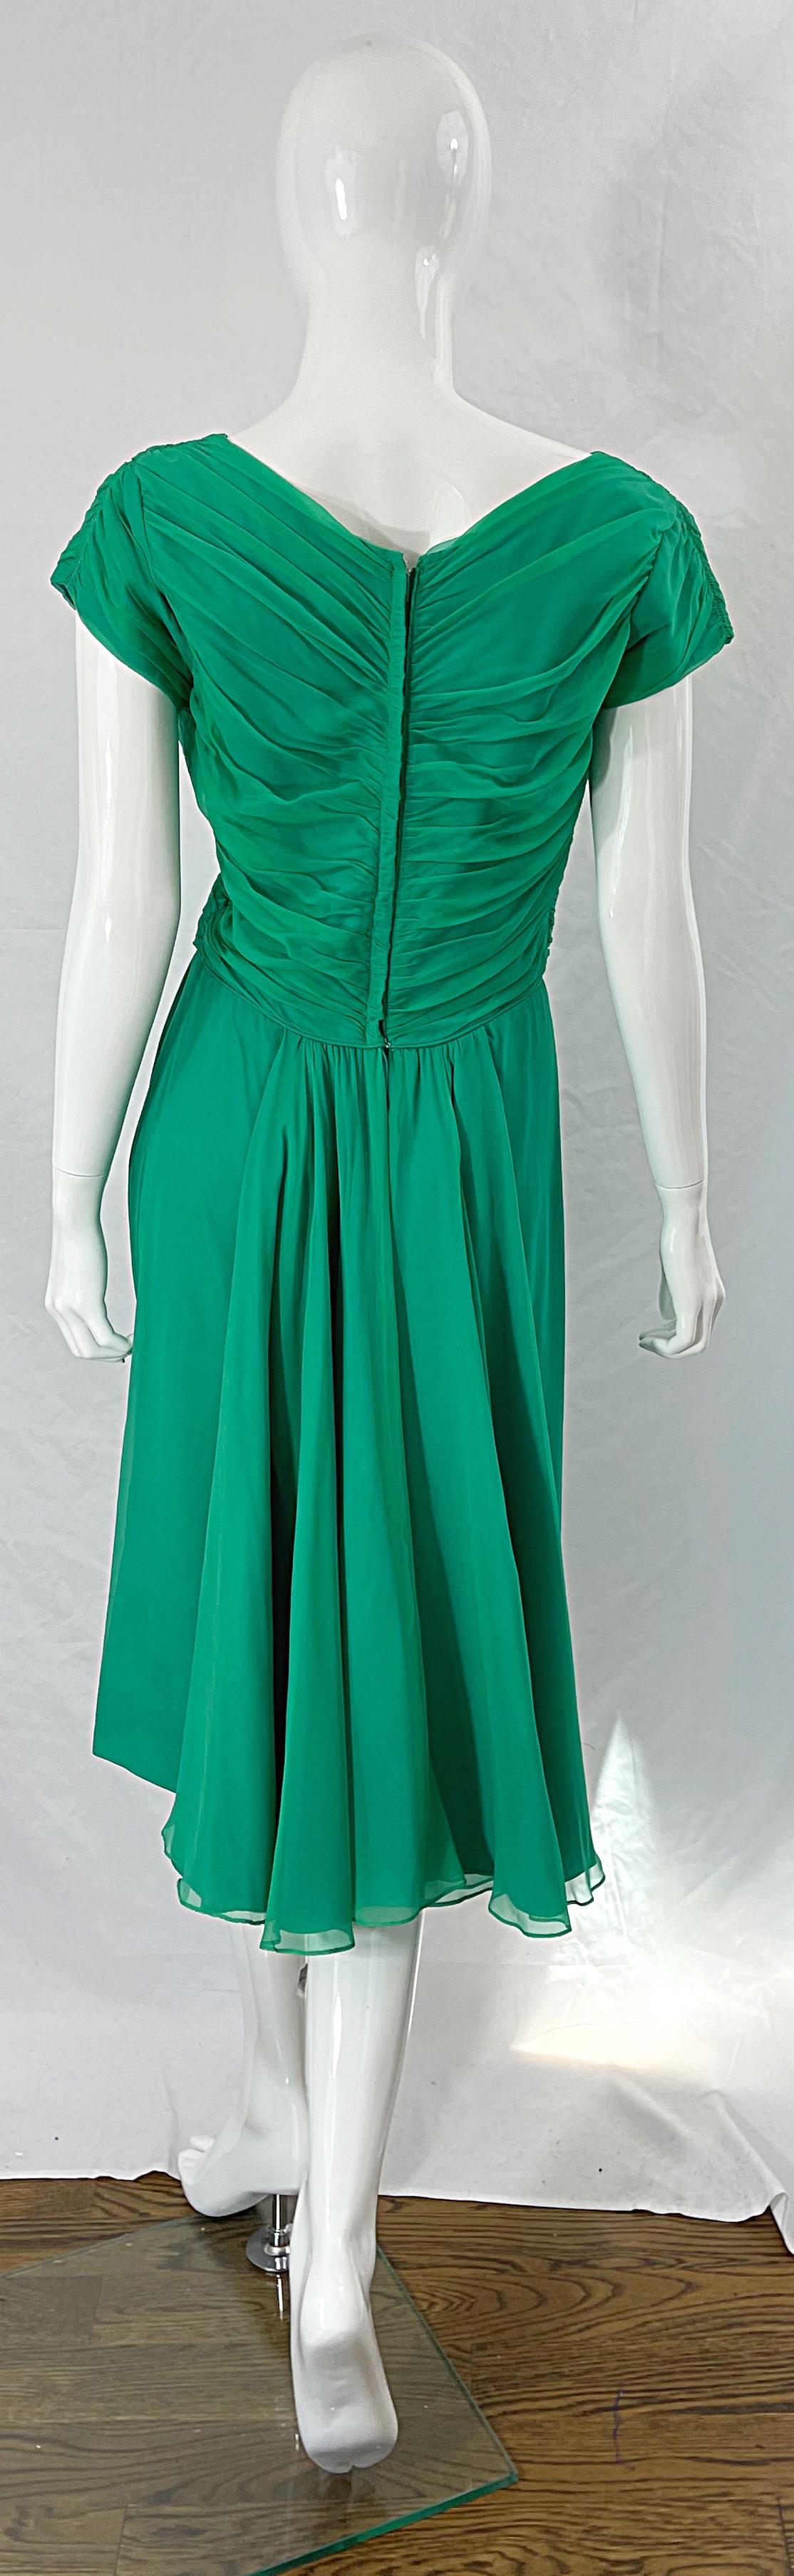 1950s Kelly Green Demi Couture Silk Chiffon Vintage Short Sleeve 50s Dress For Sale 5